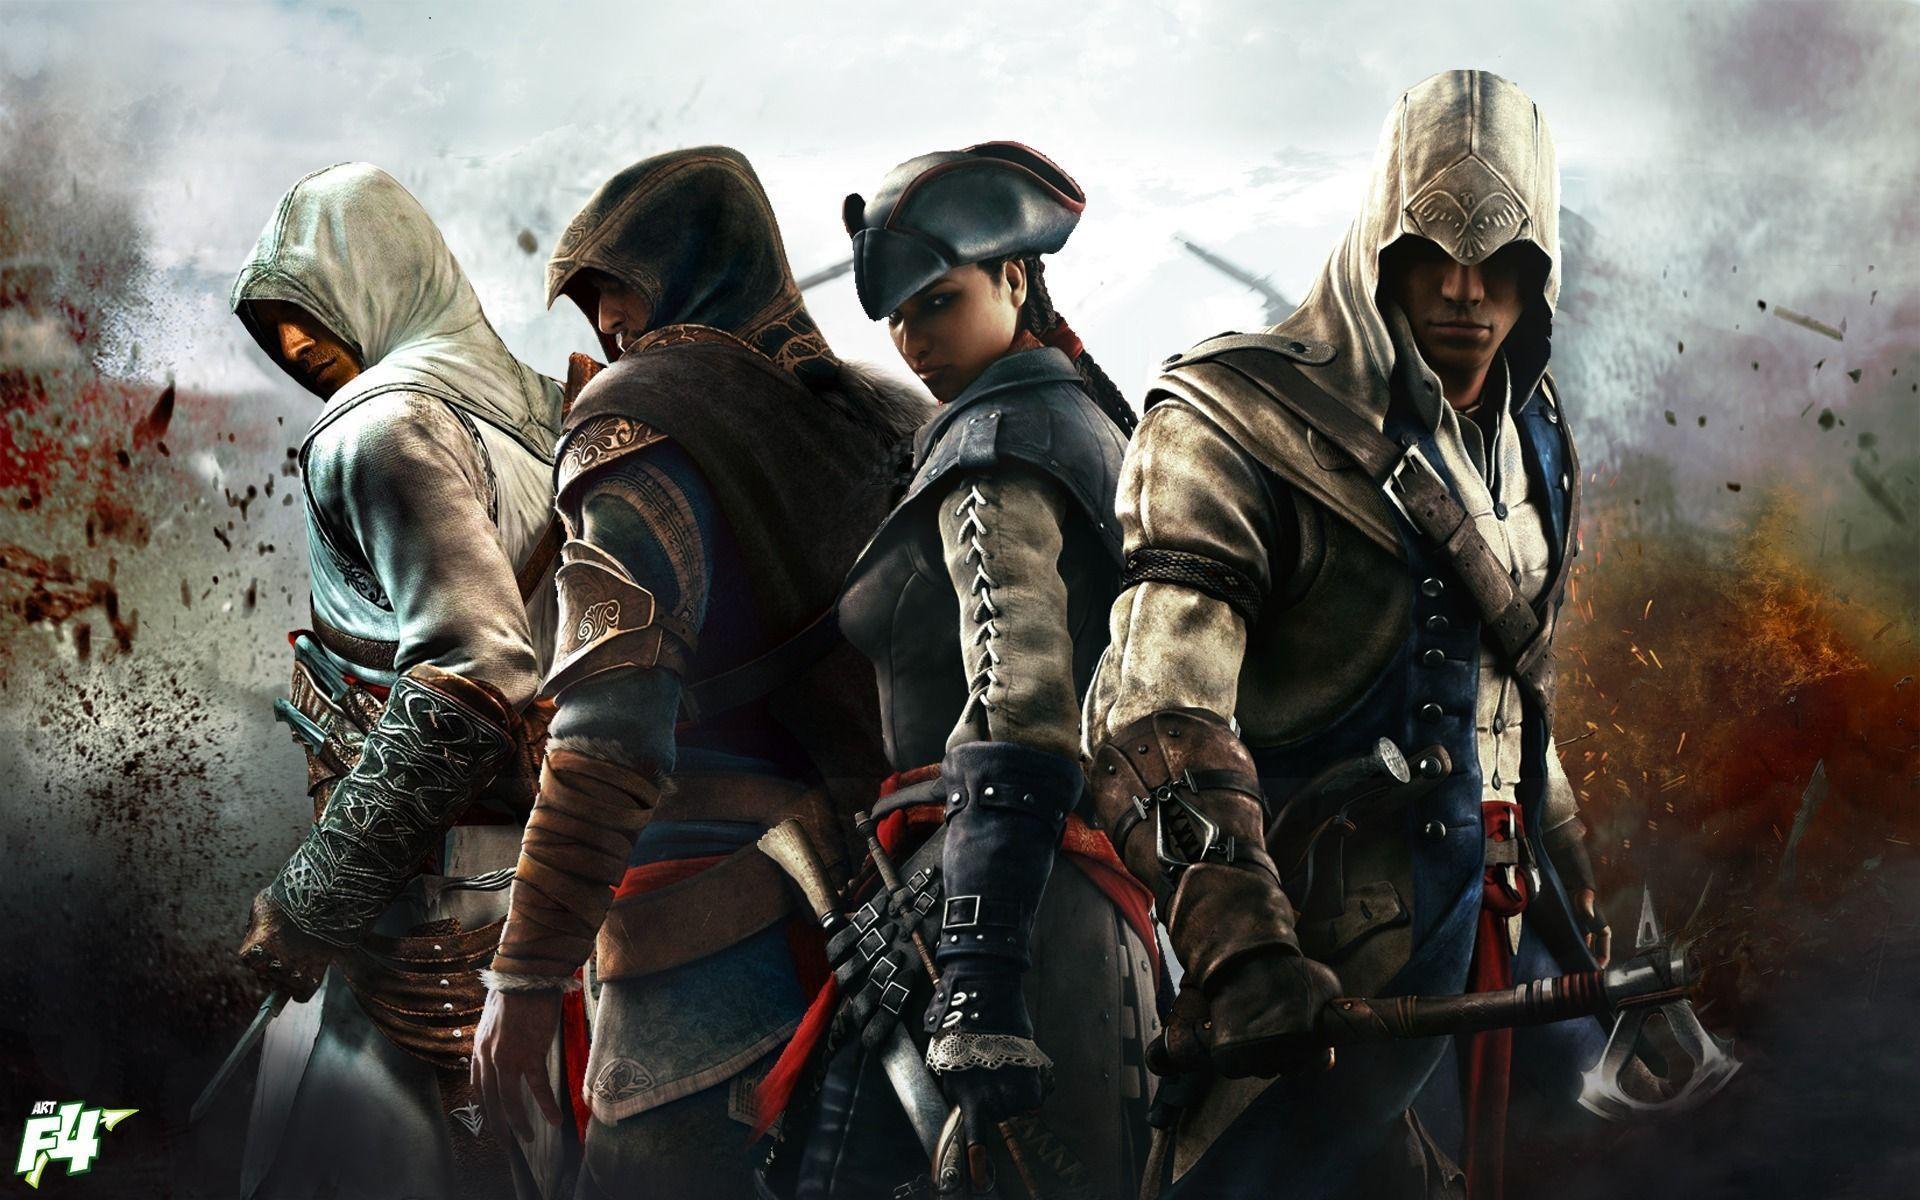 Download Assassin&;s Creed III Characters (1148) Full Size. Game